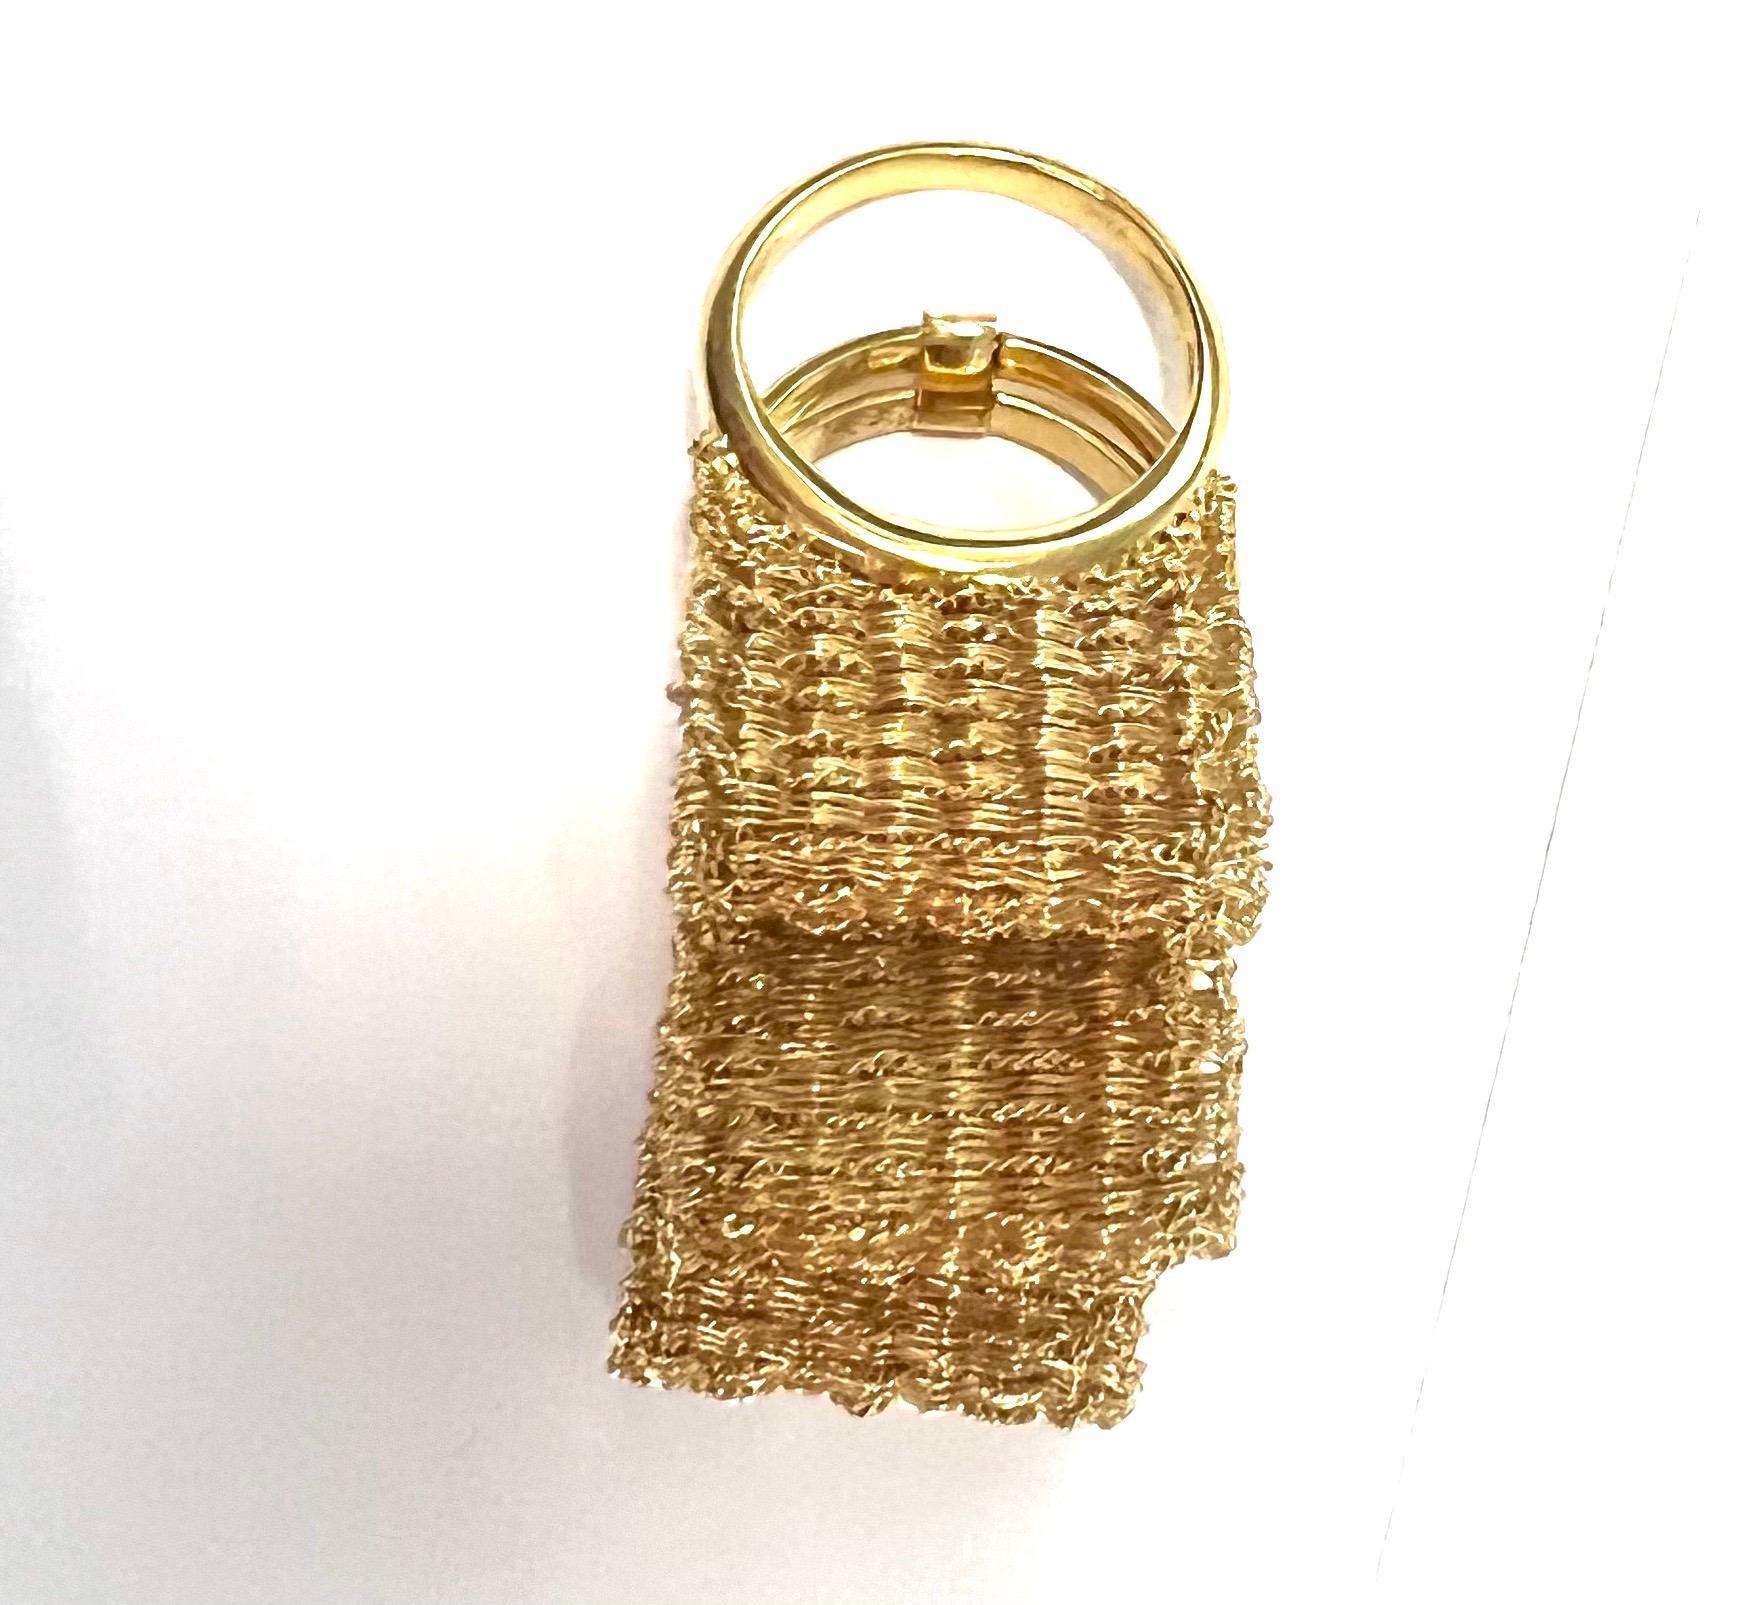 II Finalist at the Oscar Jewelry competition
This ring was especially made for the competition.
Ring with gold fabric details.
Gold weight gr 28.80
Size 6 1/2
Stamp MICHELETTO 750 10 MI  ITALY

This ring can make set with 4768-G (Necklace) and